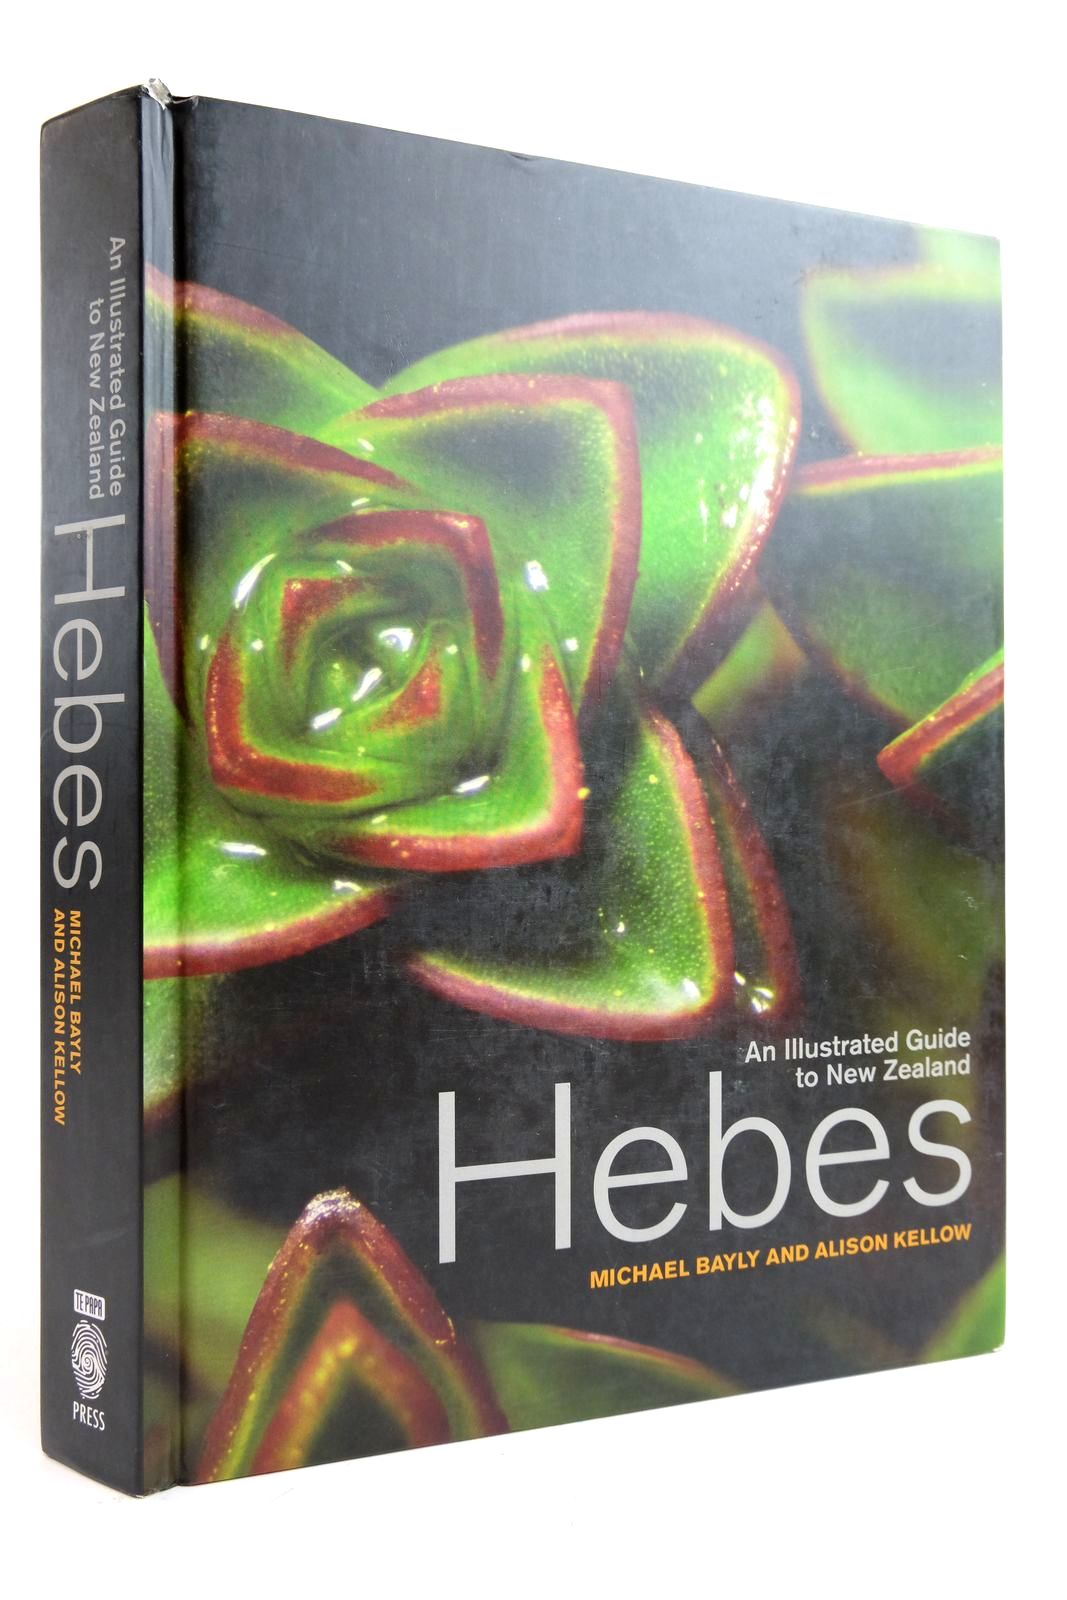 Photo of AN ILLUSTRATED GUIDE TO NEW ZEALAND HEBES written by Bayly, M.J. Kellow, A.V. et al, published by Te Papa Press (STOCK CODE: 2135370)  for sale by Stella & Rose's Books